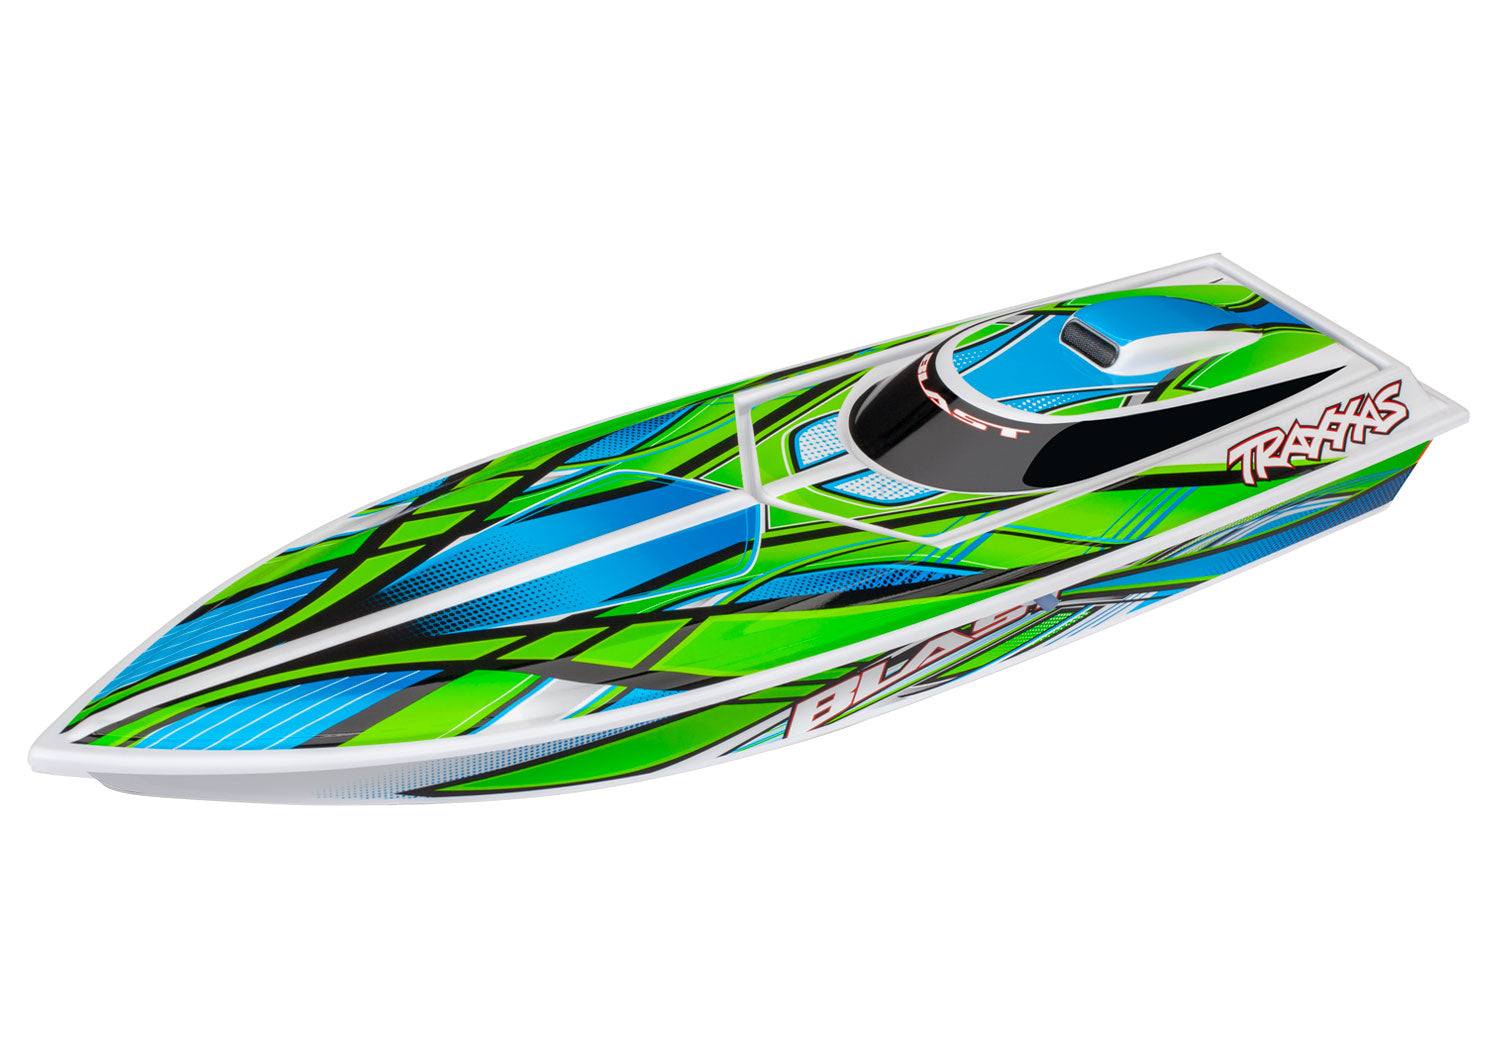 38104-8 Green Blast: High Performance Race Boat with TQ™ 2.4GHz Radio System